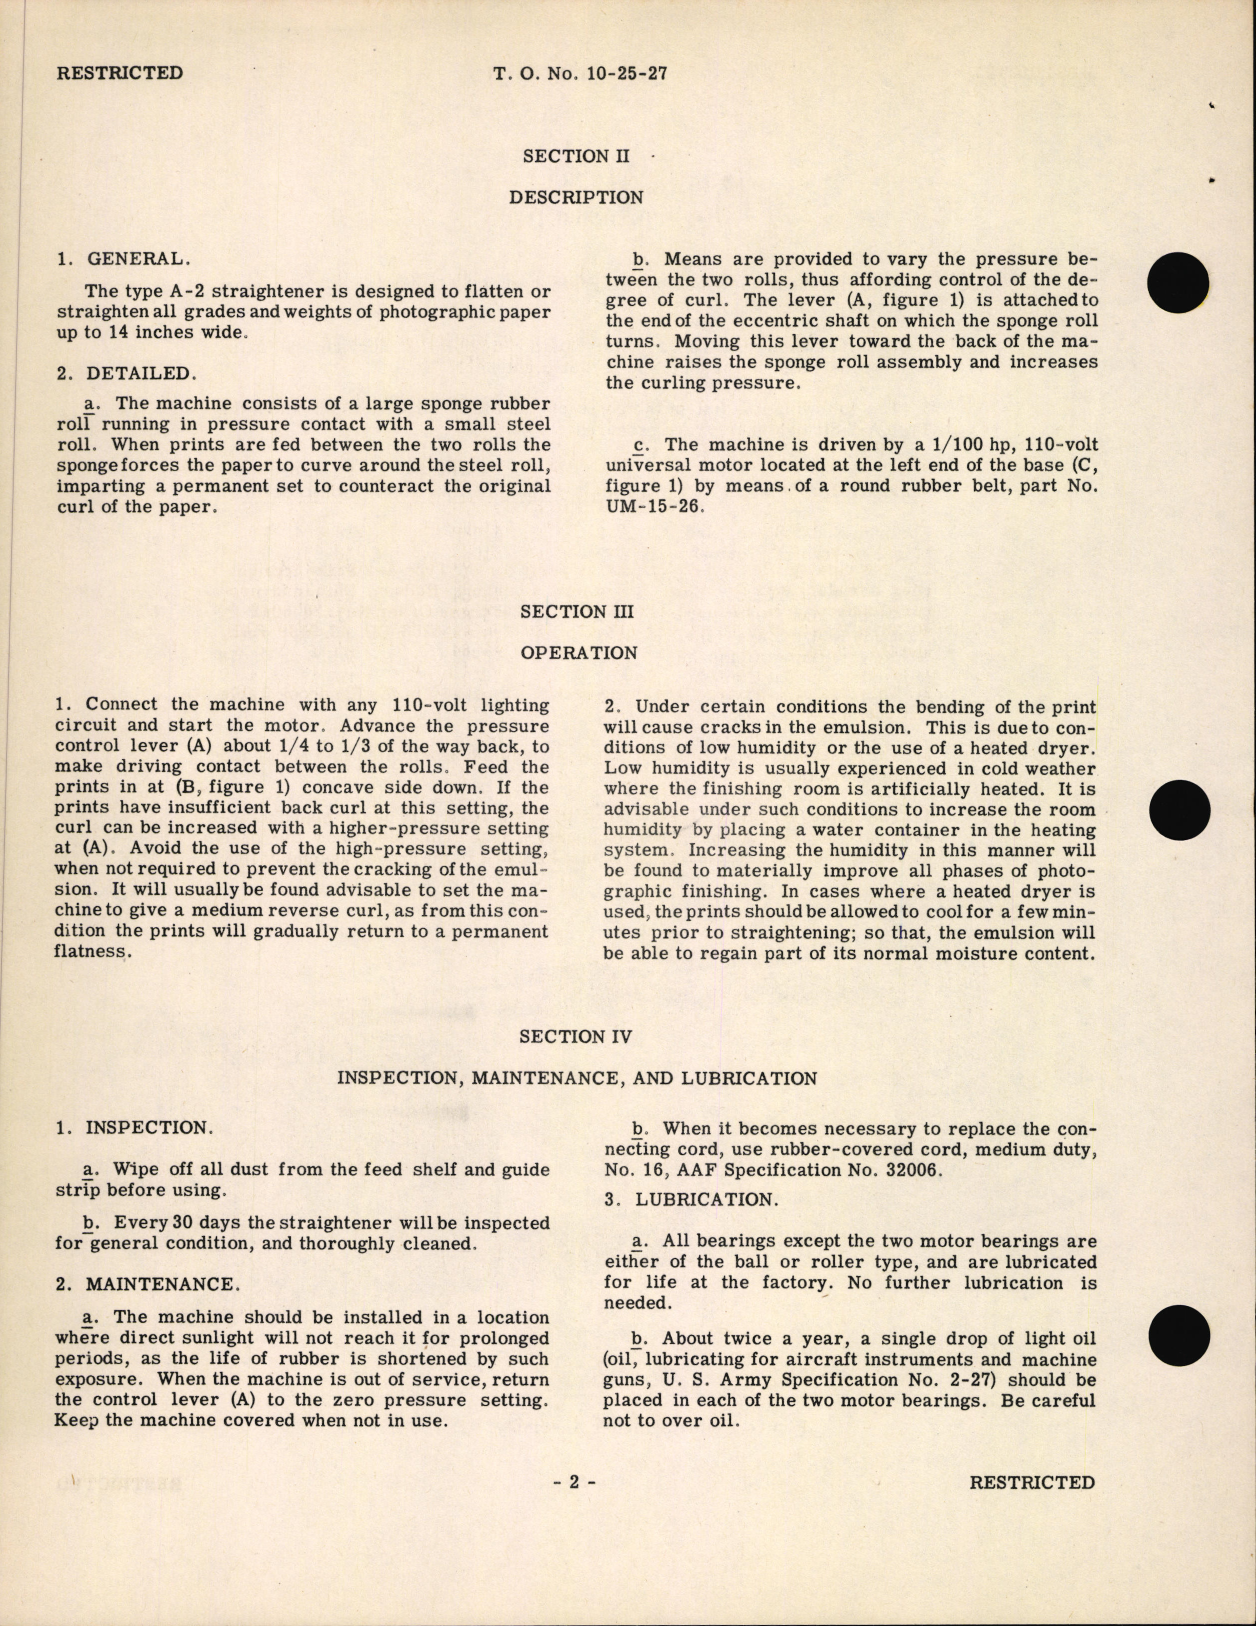 Sample page 6 from AirCorps Library document: Handbook of Instructions with Parts Catalog for Type A-2 Print Straightener